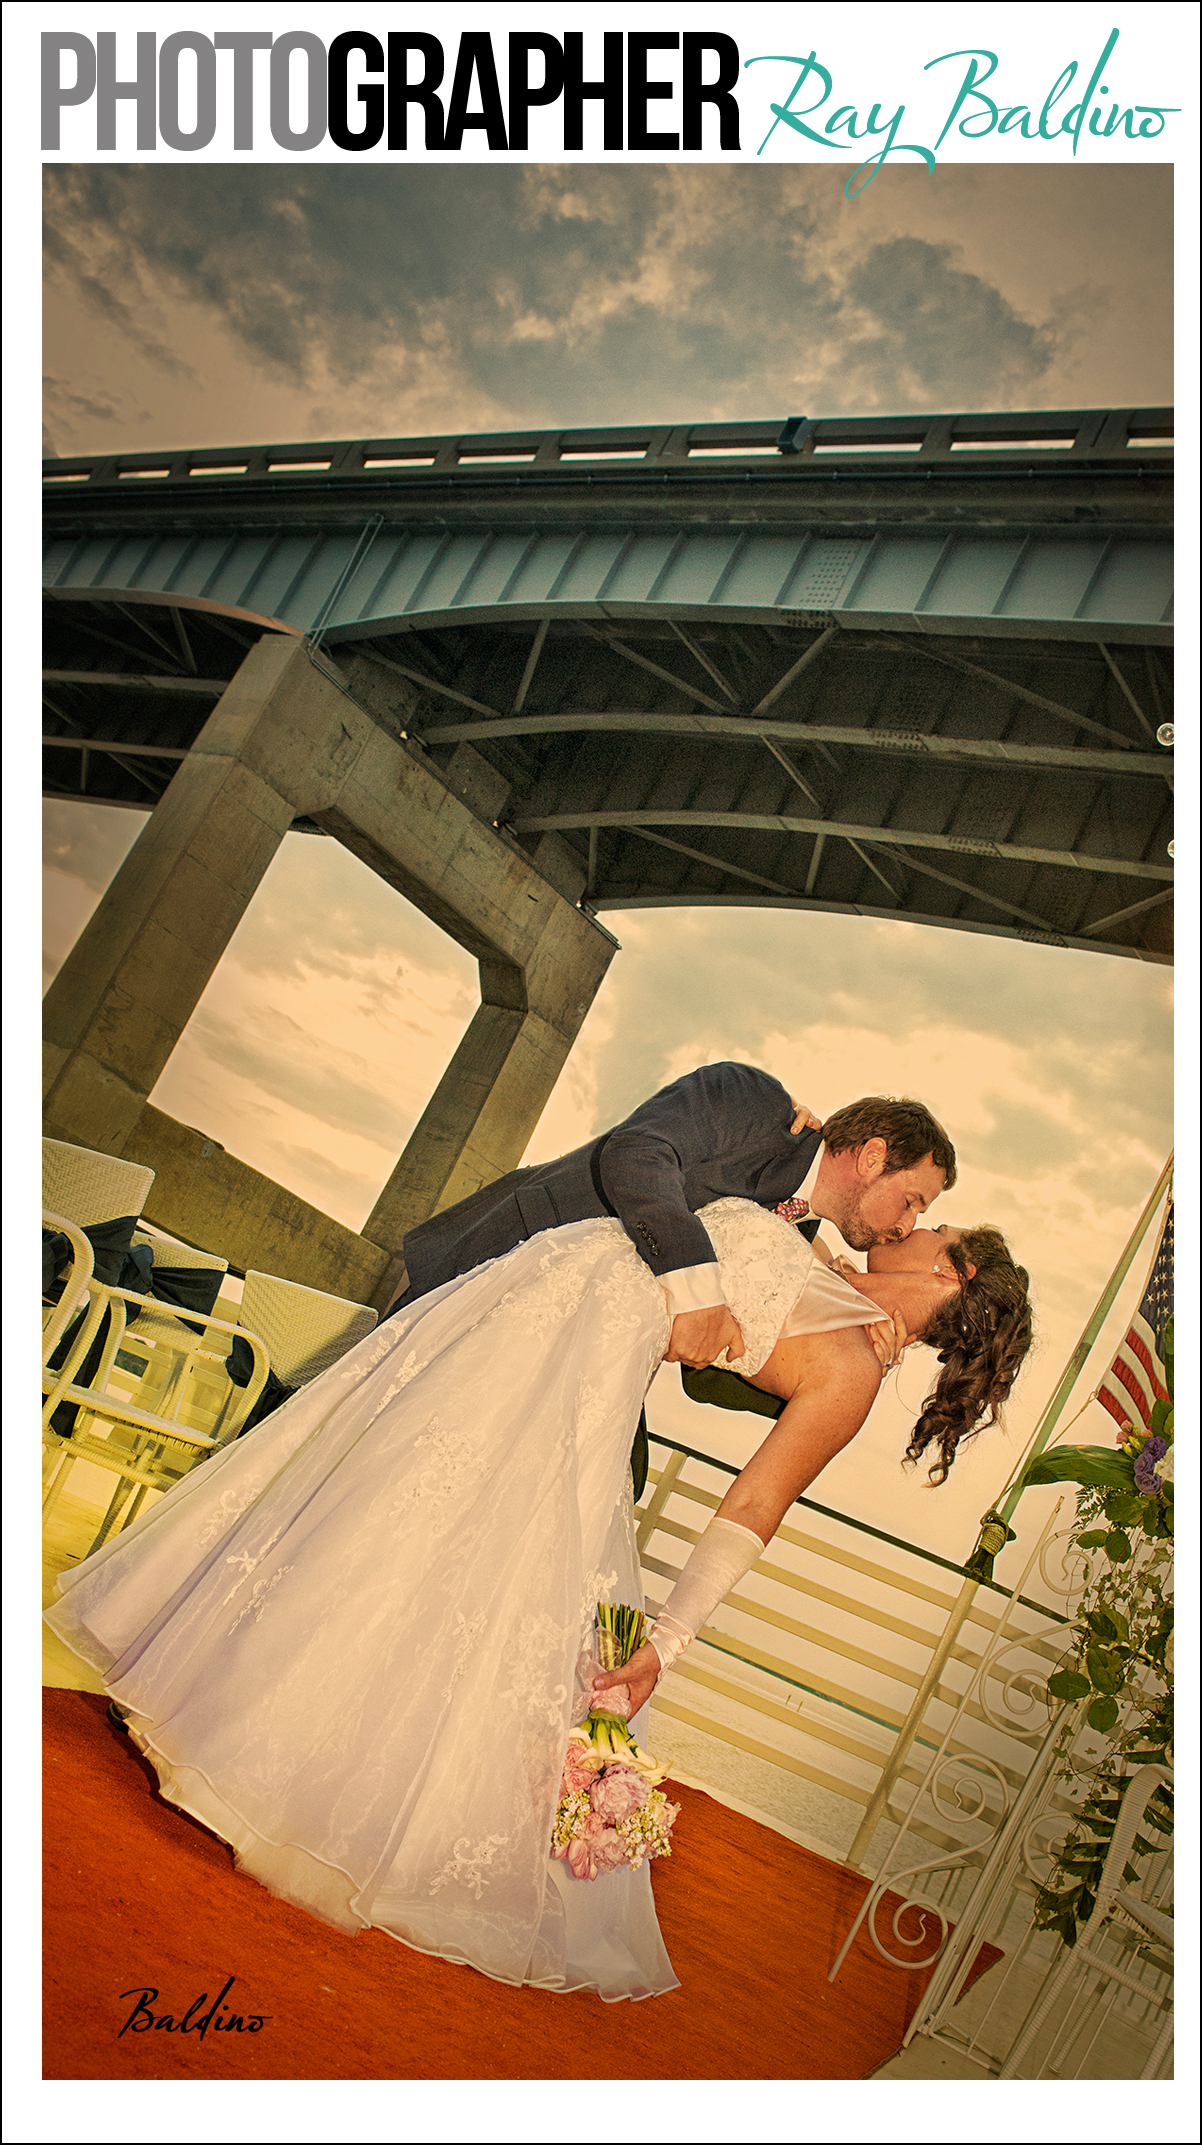 this-image-by-ray-baldino-photography-from-cocoa-beach-is-of-amy-and-michaels-first-kiss-on-the-indian-river-queen-located-in-cocoa-village-brevard-florida